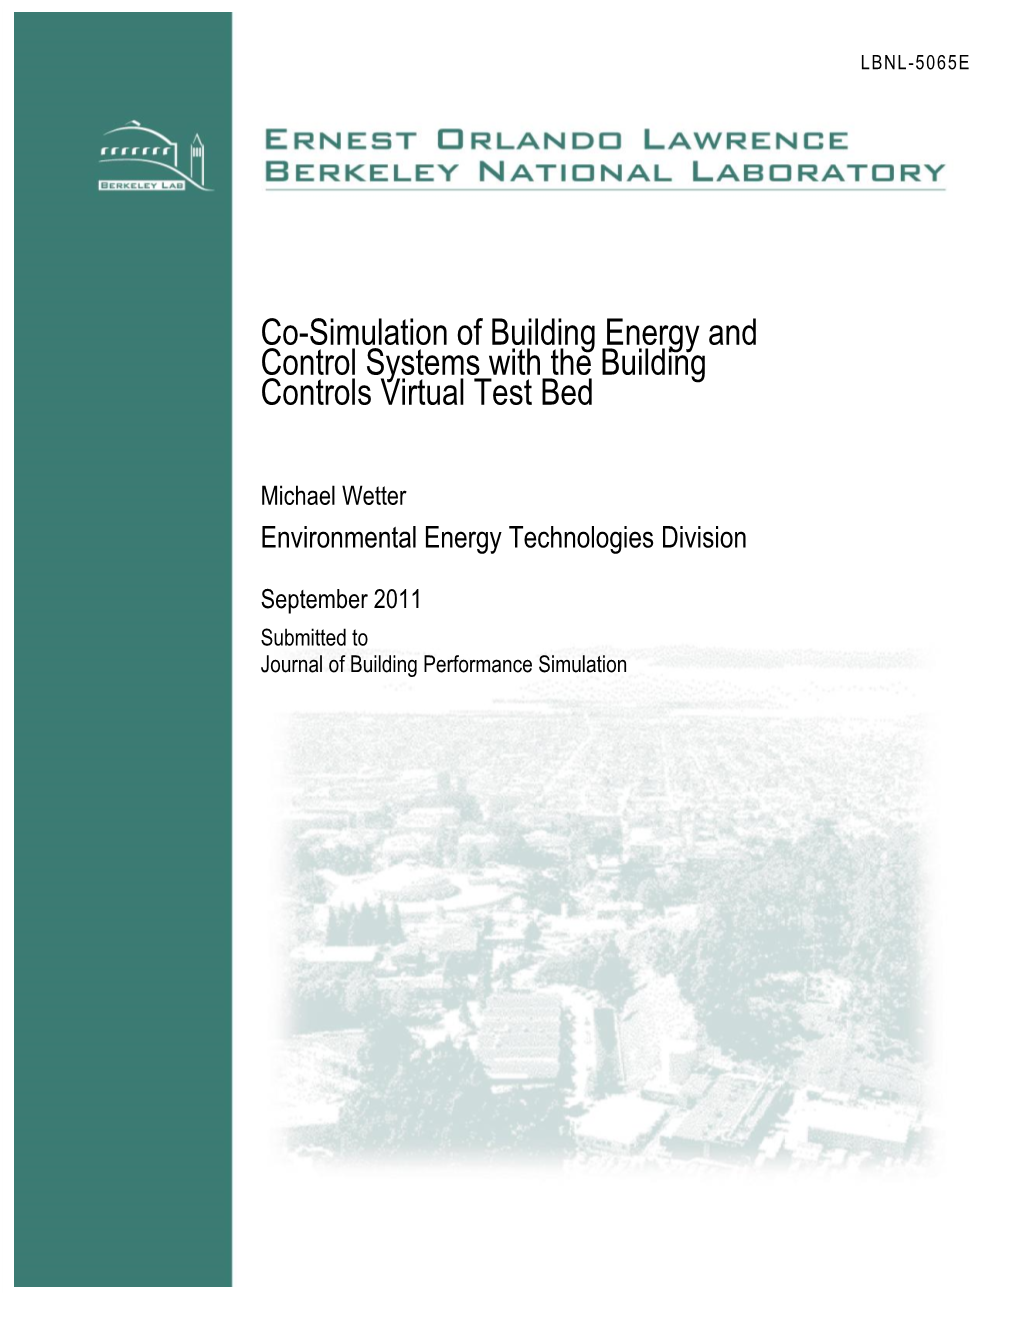 Modelica-Based Modeling and Simulation to Support Research and De- Velopment in Building Energy and Control Systems